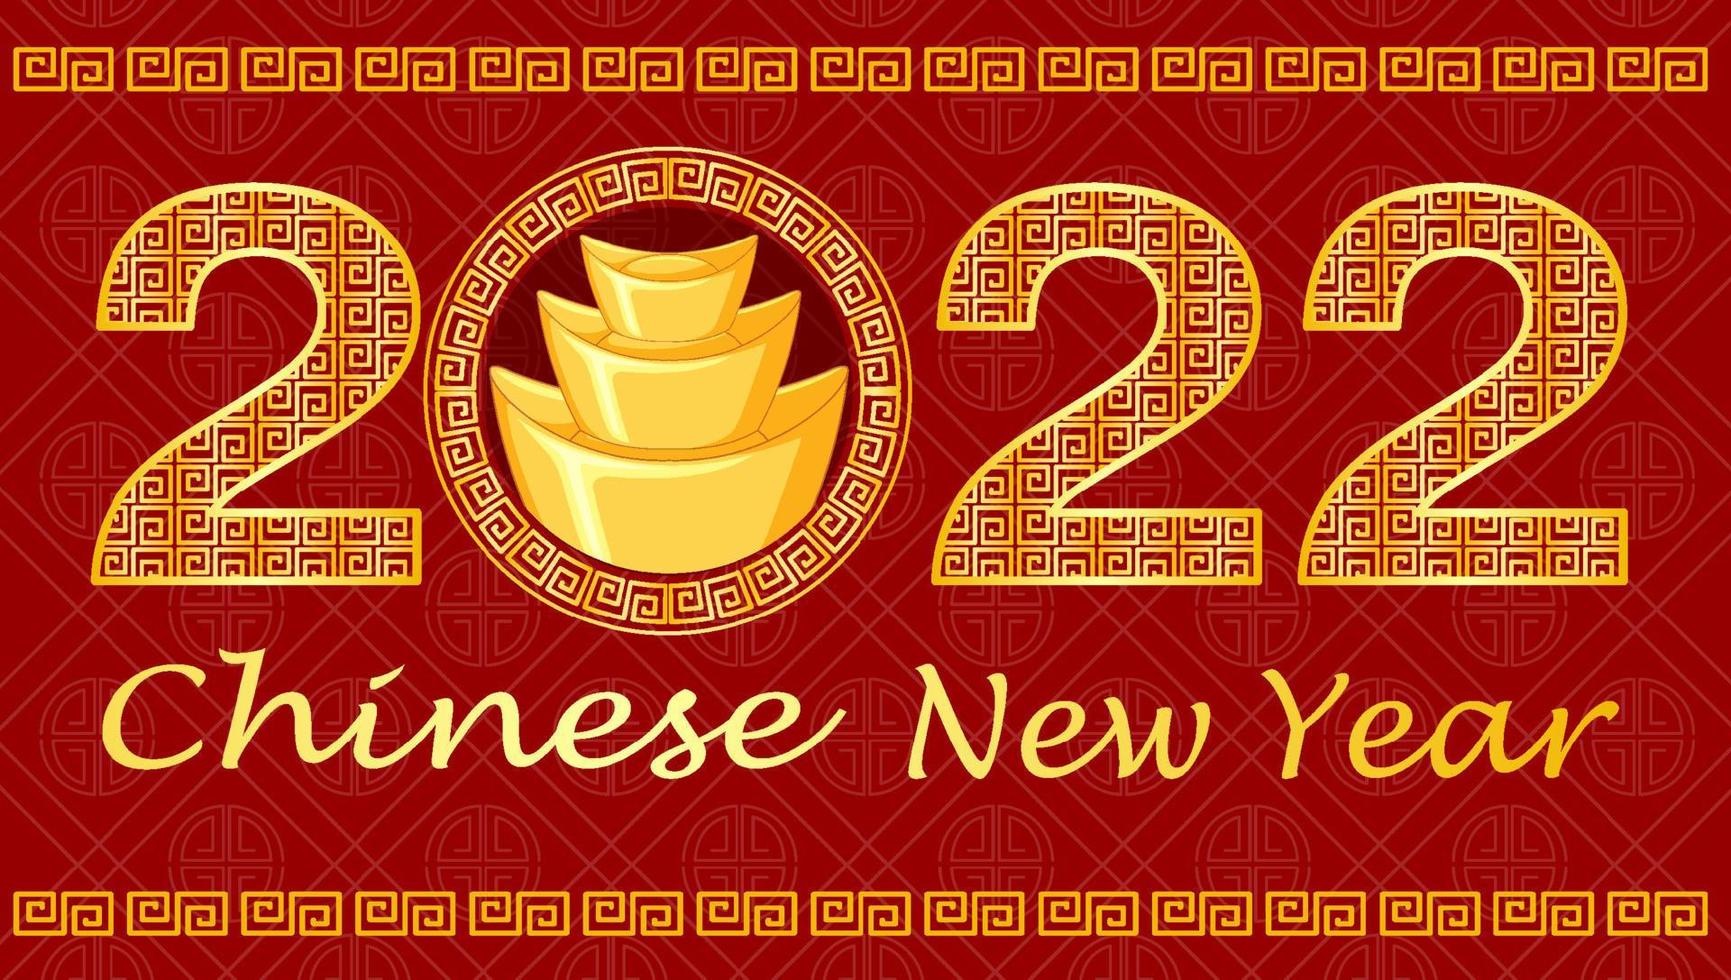 Chinese New Year background with golden coins vector